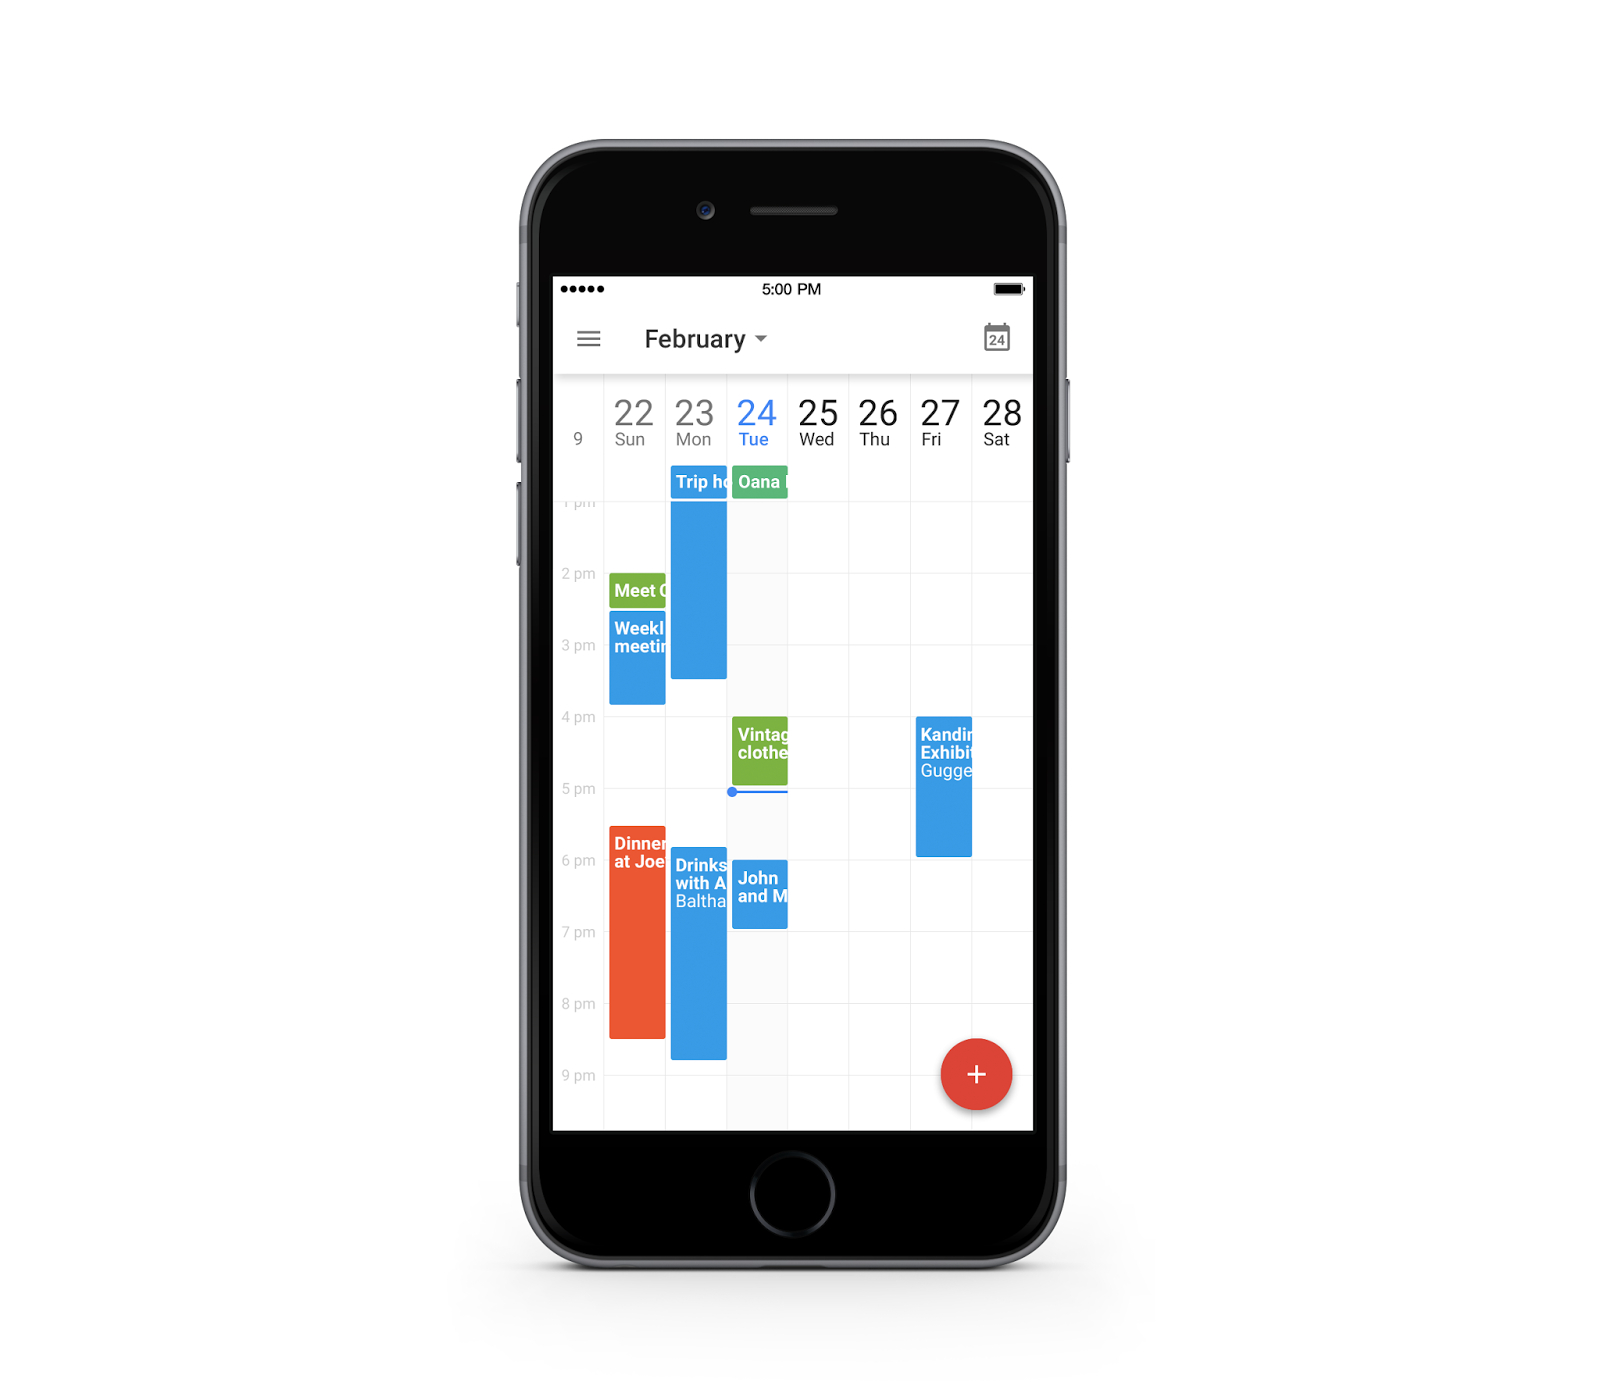 Google Calendar For Iphone: More Ways To Stay On Top Of Your